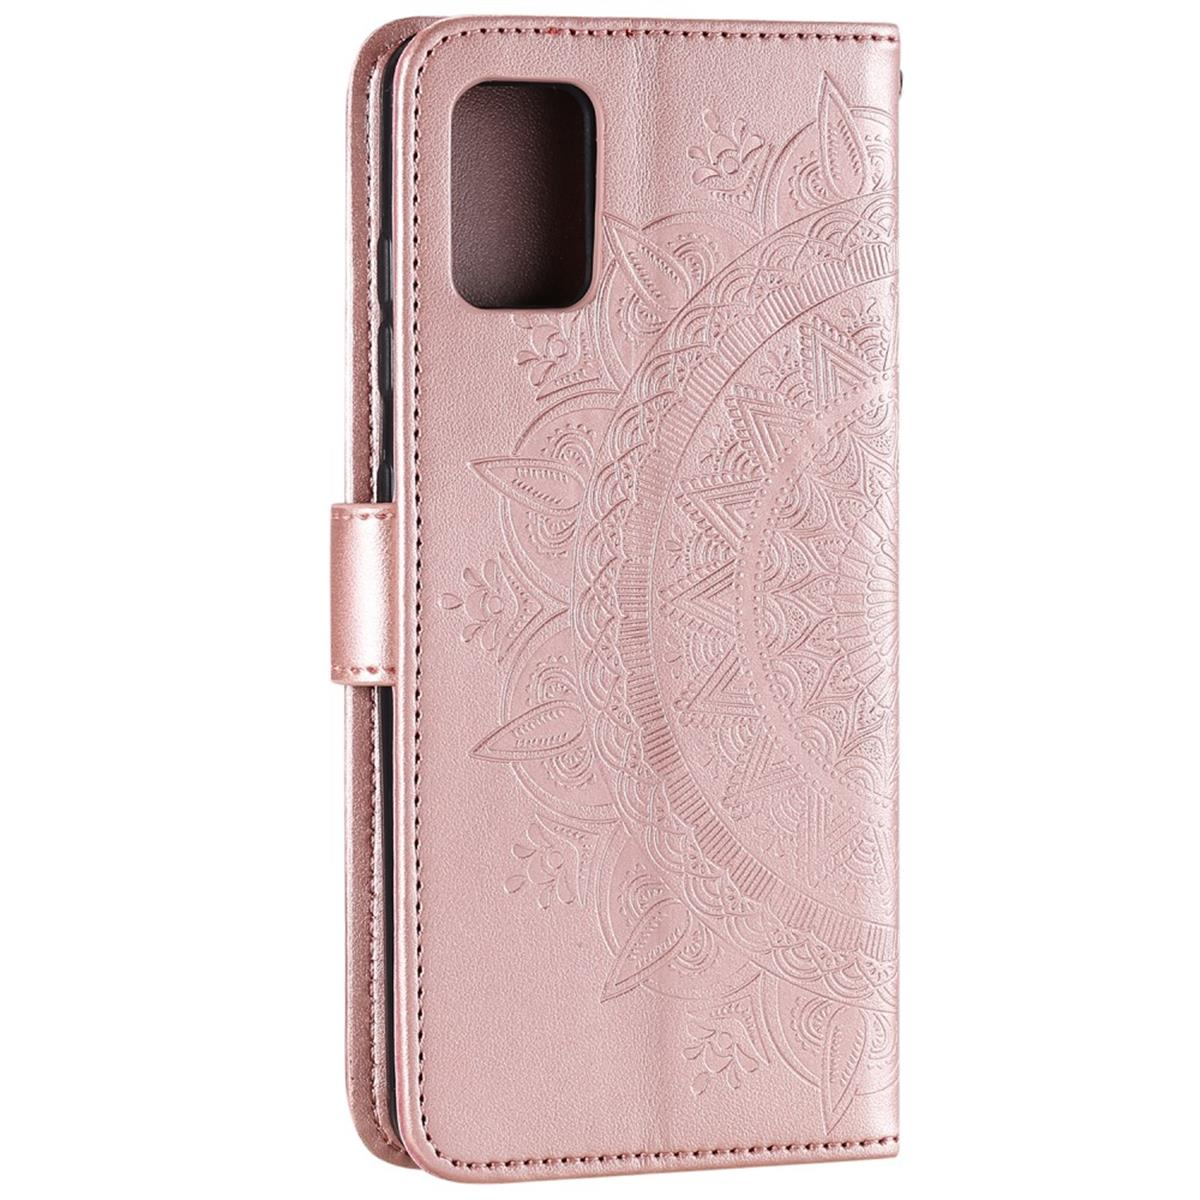 A51, Galaxy Samsung, COVERKINGZ Mandala Muster, mit Bookcover, Roségold Klapphülle